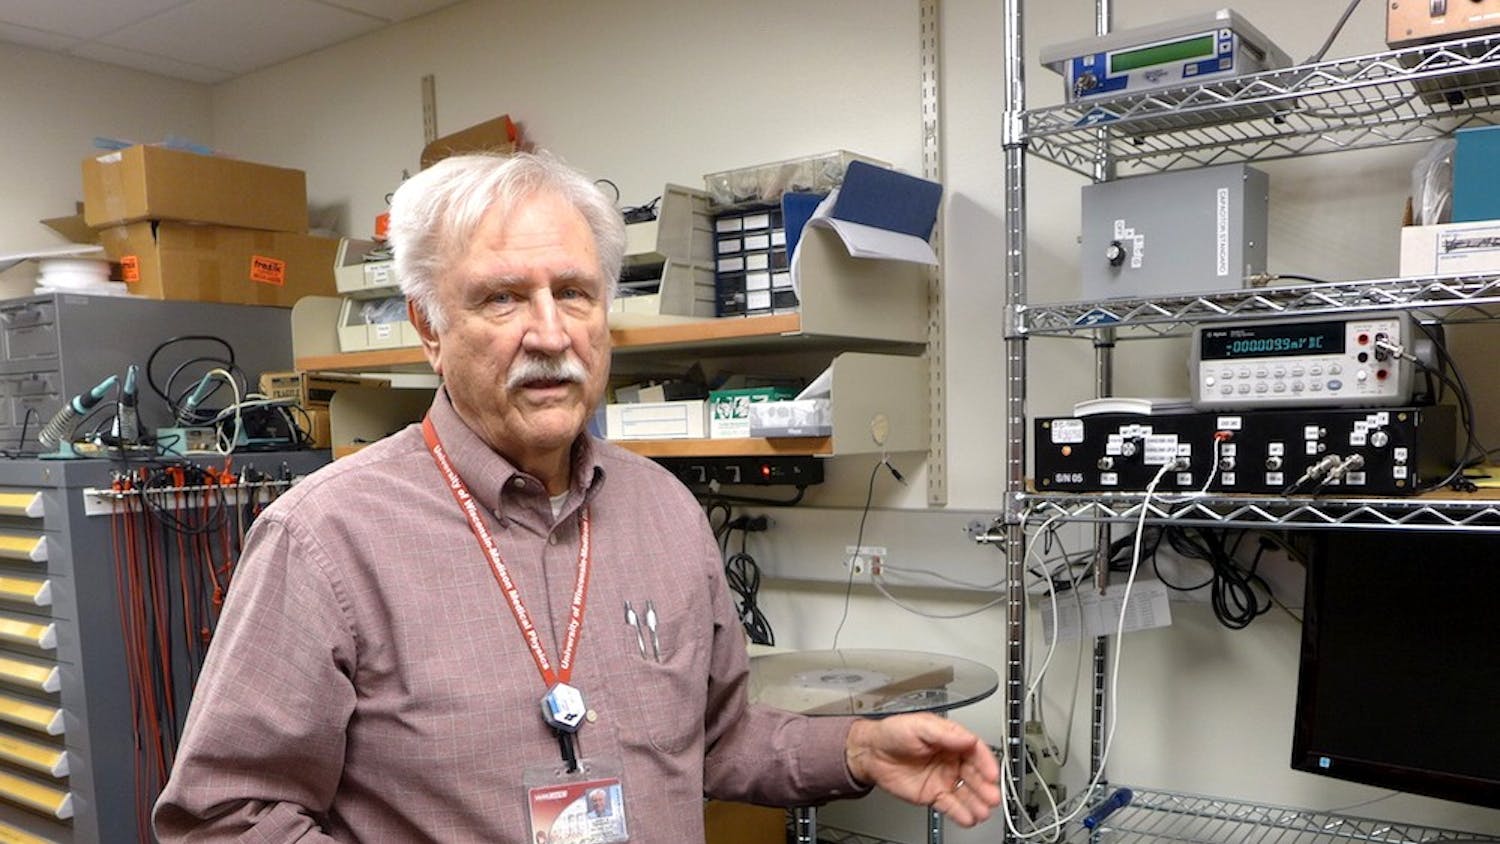 Larry DeWerd&nbsp;has worked at the University of Wisconsin Radiation Calibration Laboratory since 1981 and helps calibrate radiation instruments from across the country.